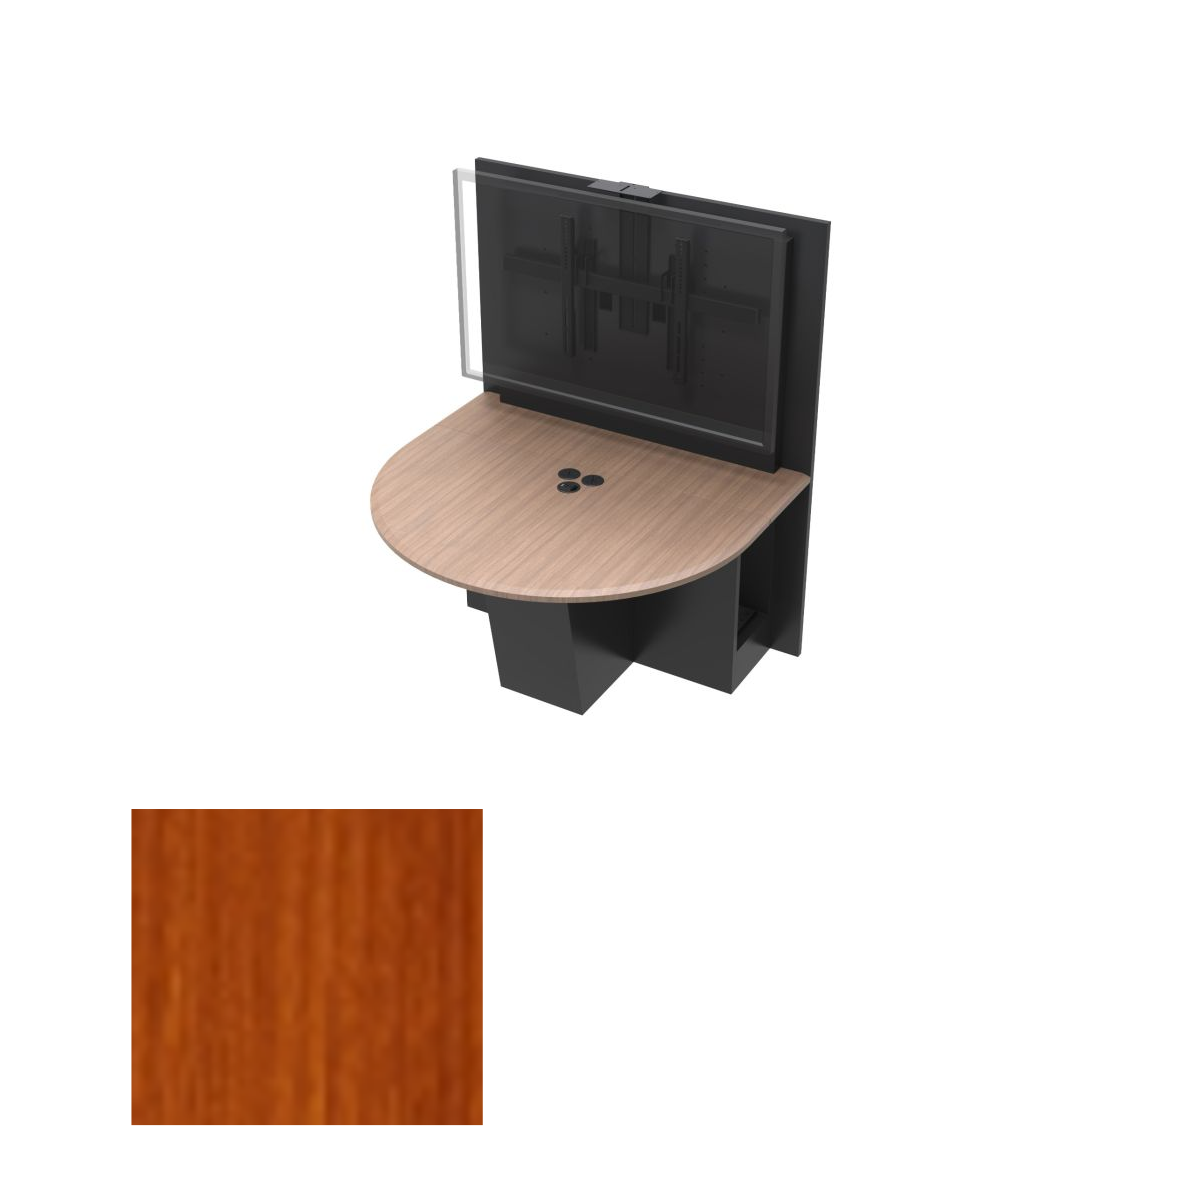 T526-HR-SPackage HCT Huddle Room Table Package, Hayward Cherry